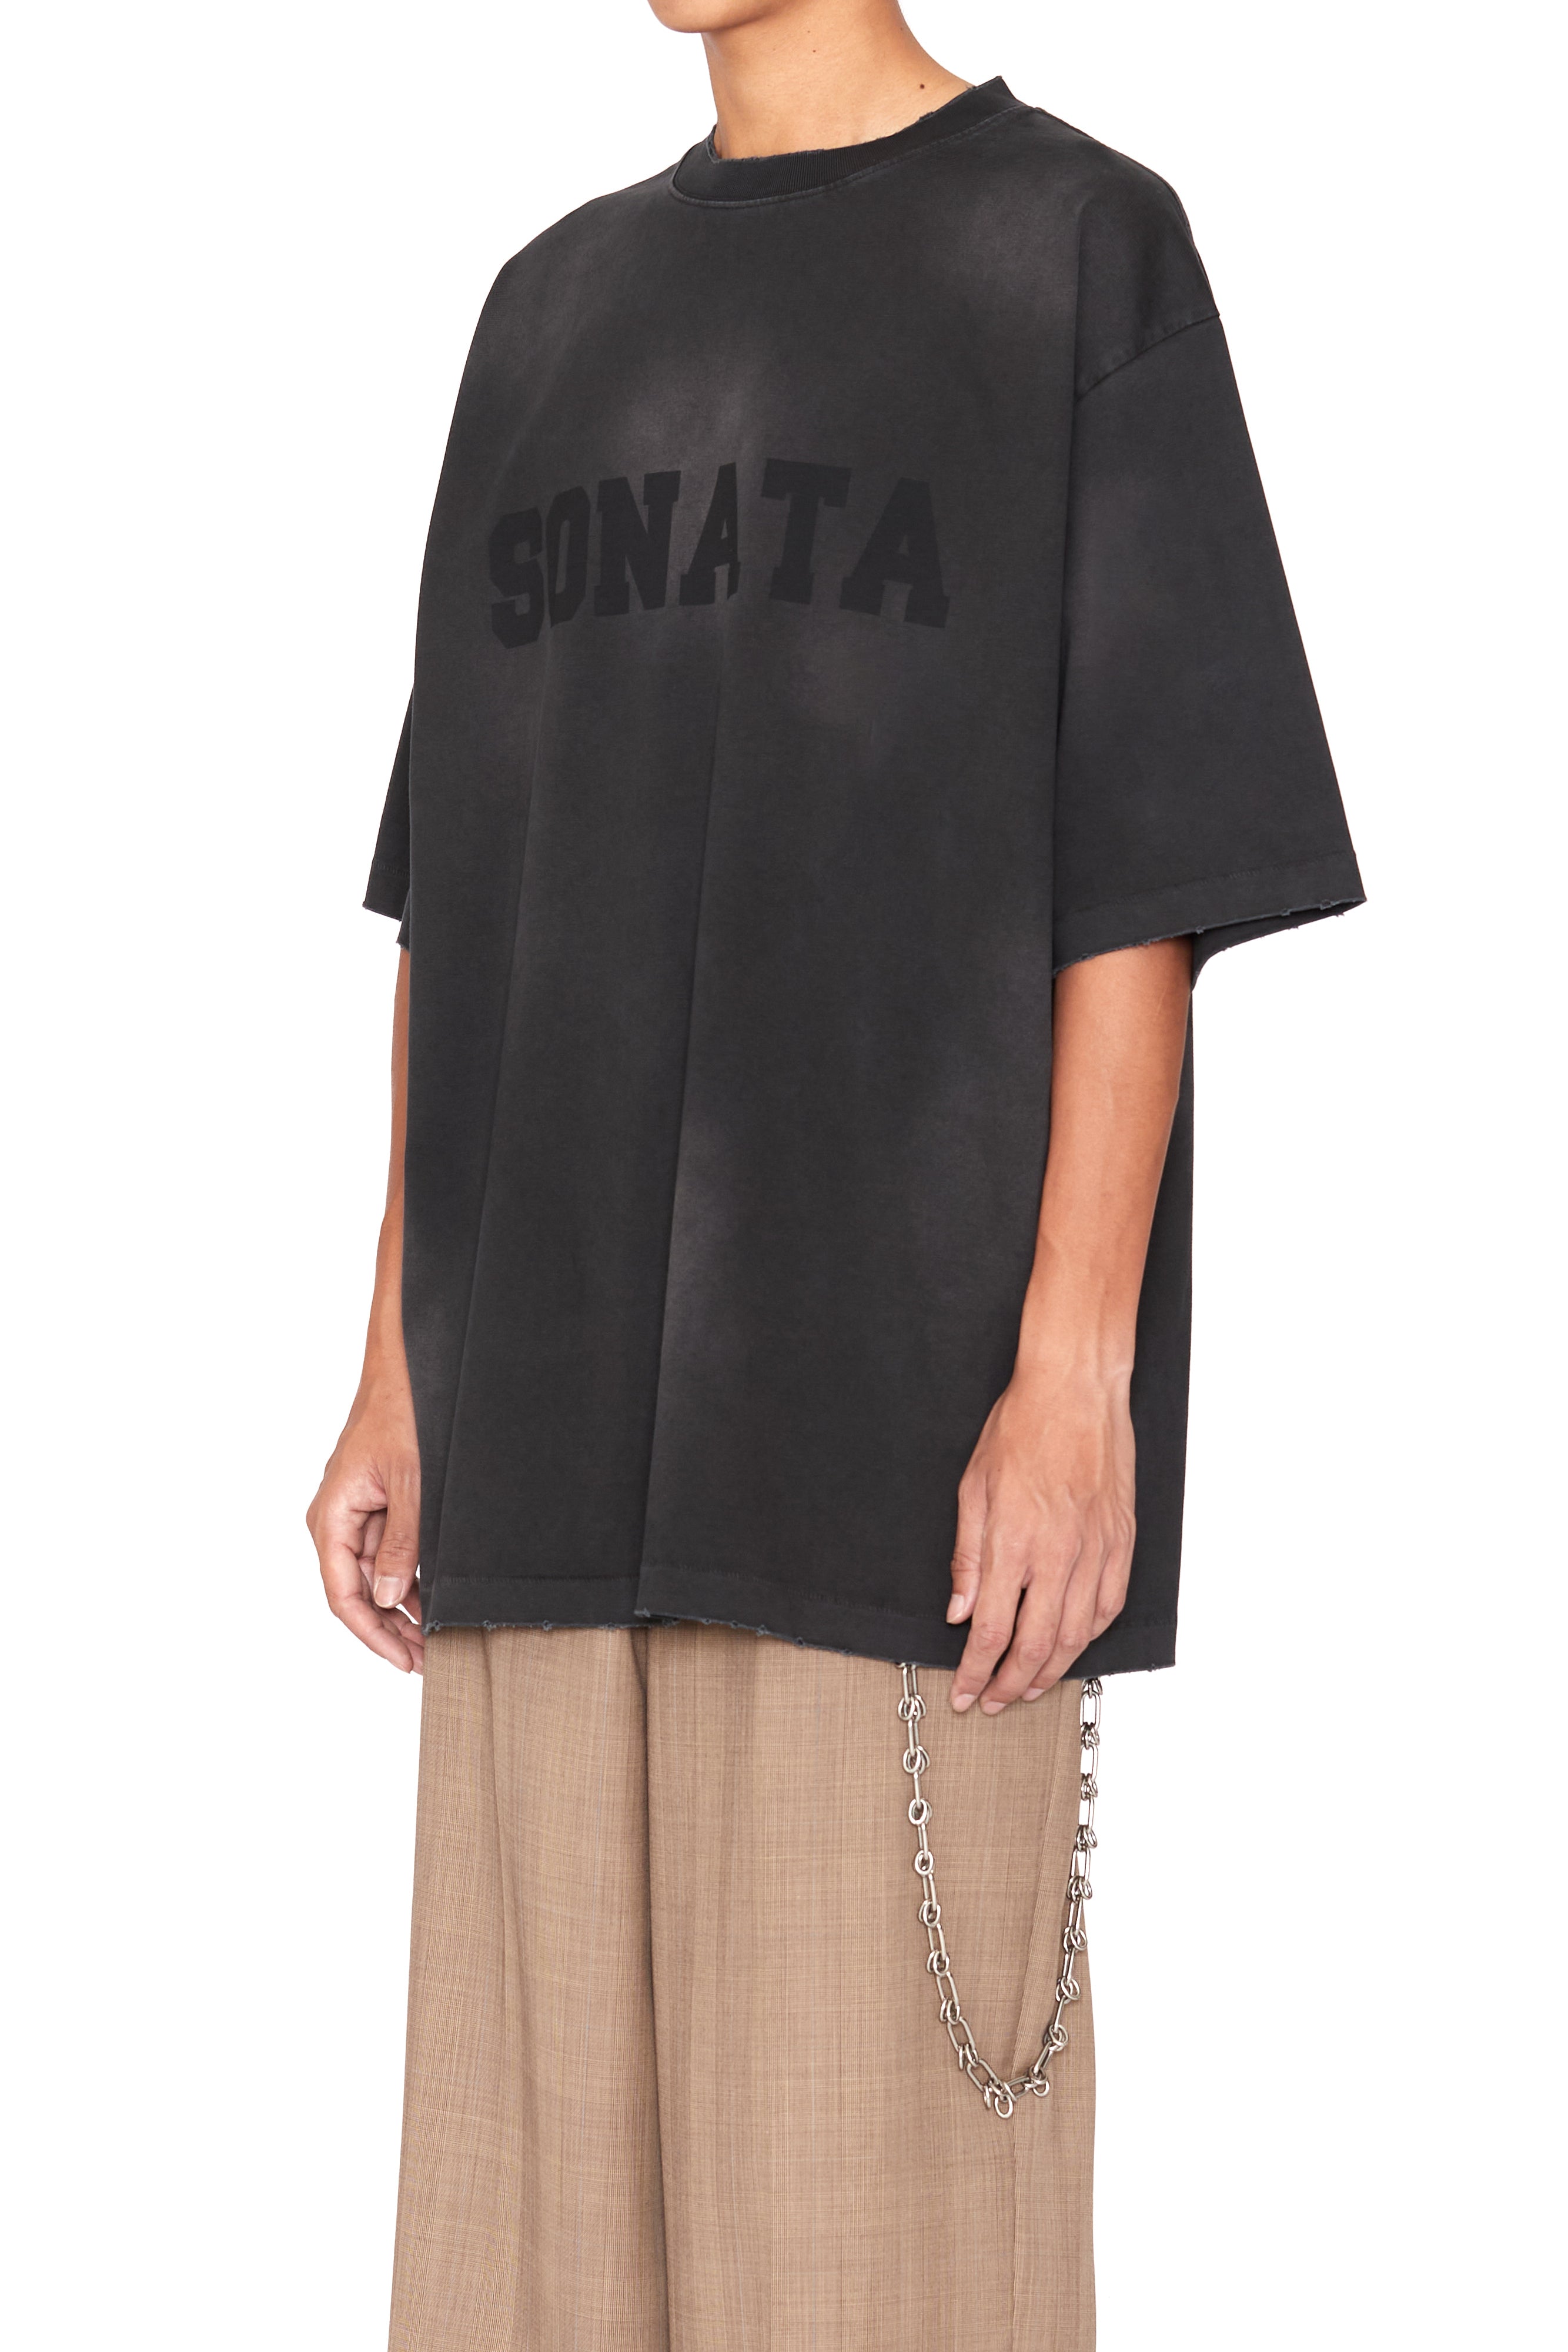 Load image into Gallery viewer, BLACK WASHED DISTRESSED AGING SONATA PRINTED SHORT SLEEVE T-SHIRT
